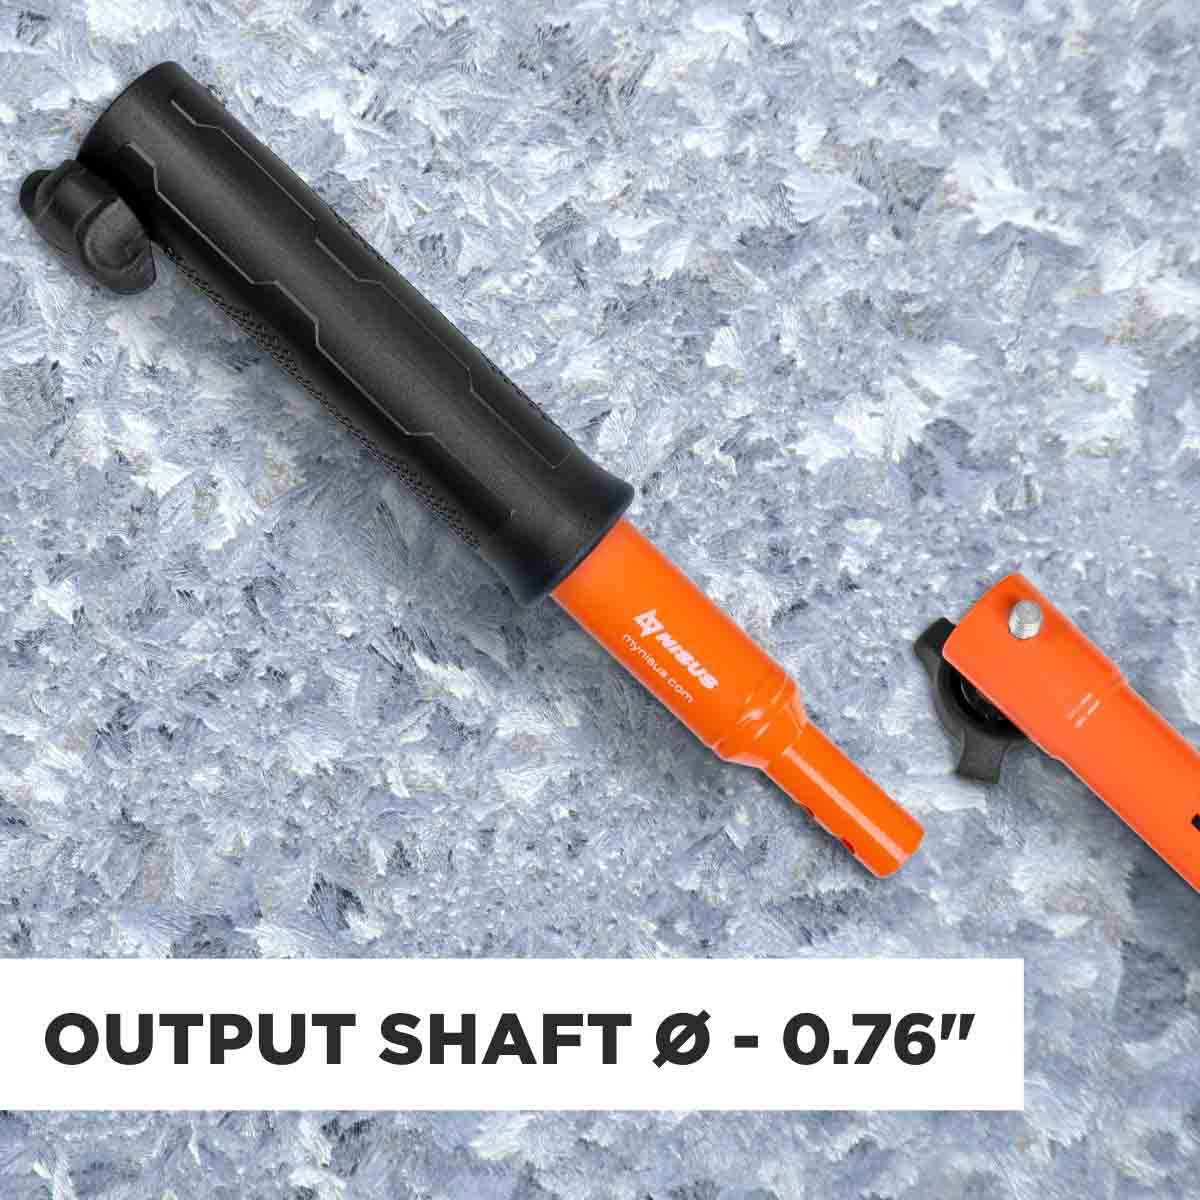 Motoshtorm Power Auger Drill Bit Extension's output shaft is 0.76 Inches